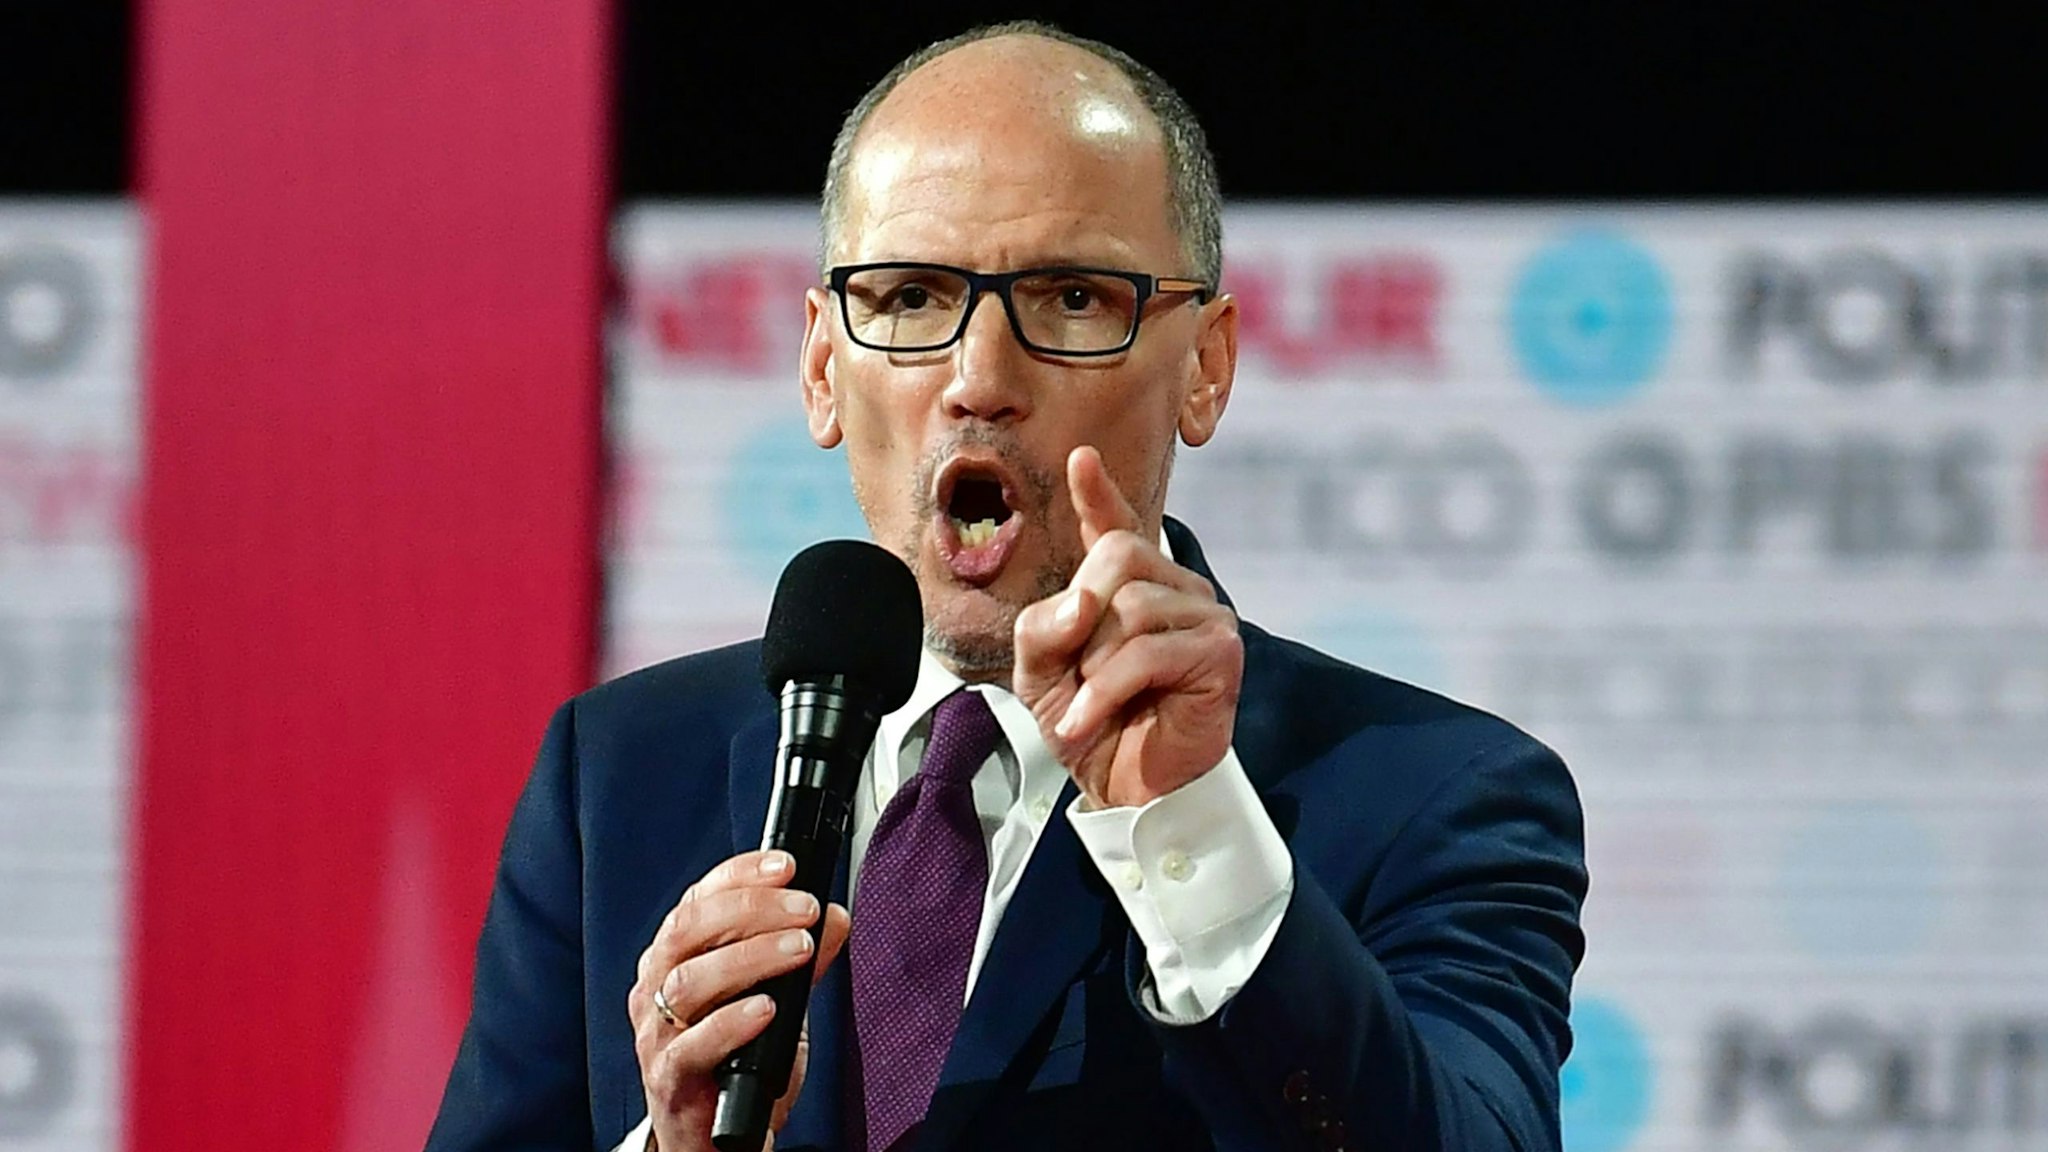 Chair of the Democratic National Committee Tom Perez speaks ahead of the sixth Democratic primary debate of the 2020 presidential campaign season co-hosted by PBS NewsHour &amp; Politico at Loyola Marymount University in Los Angeles, California on December 19, 2019.